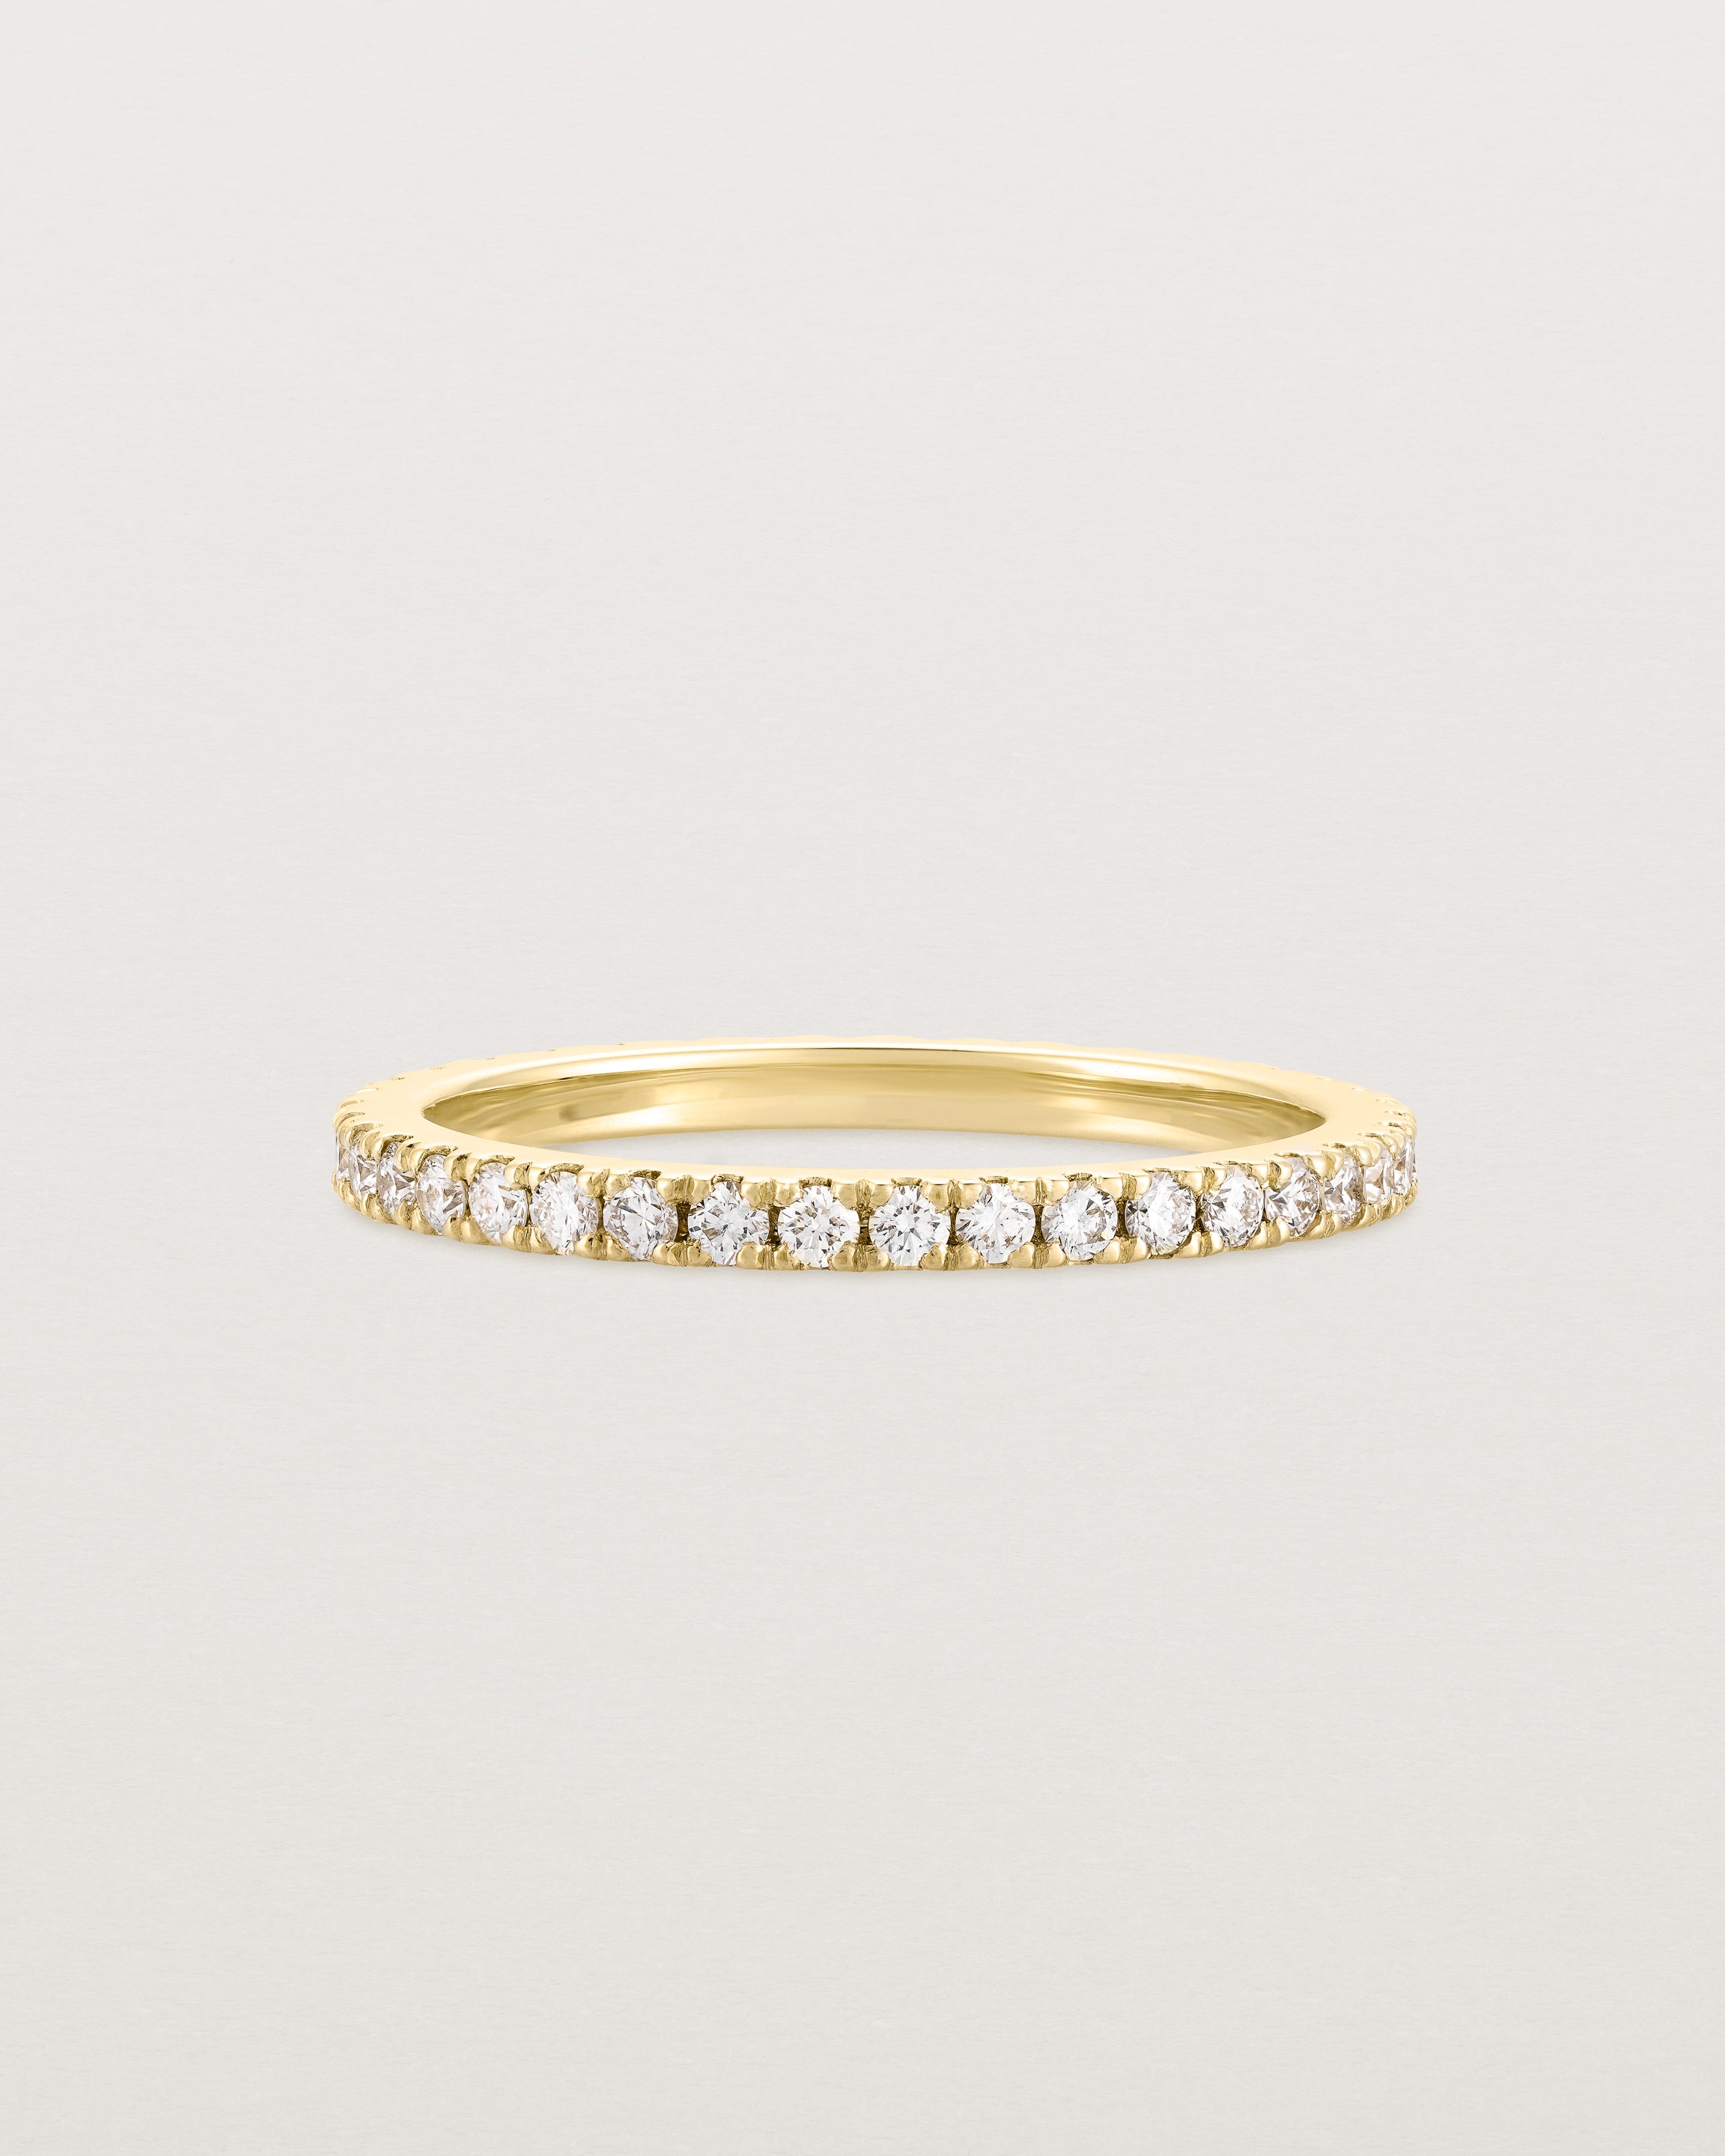 A gold ring with white diamonds